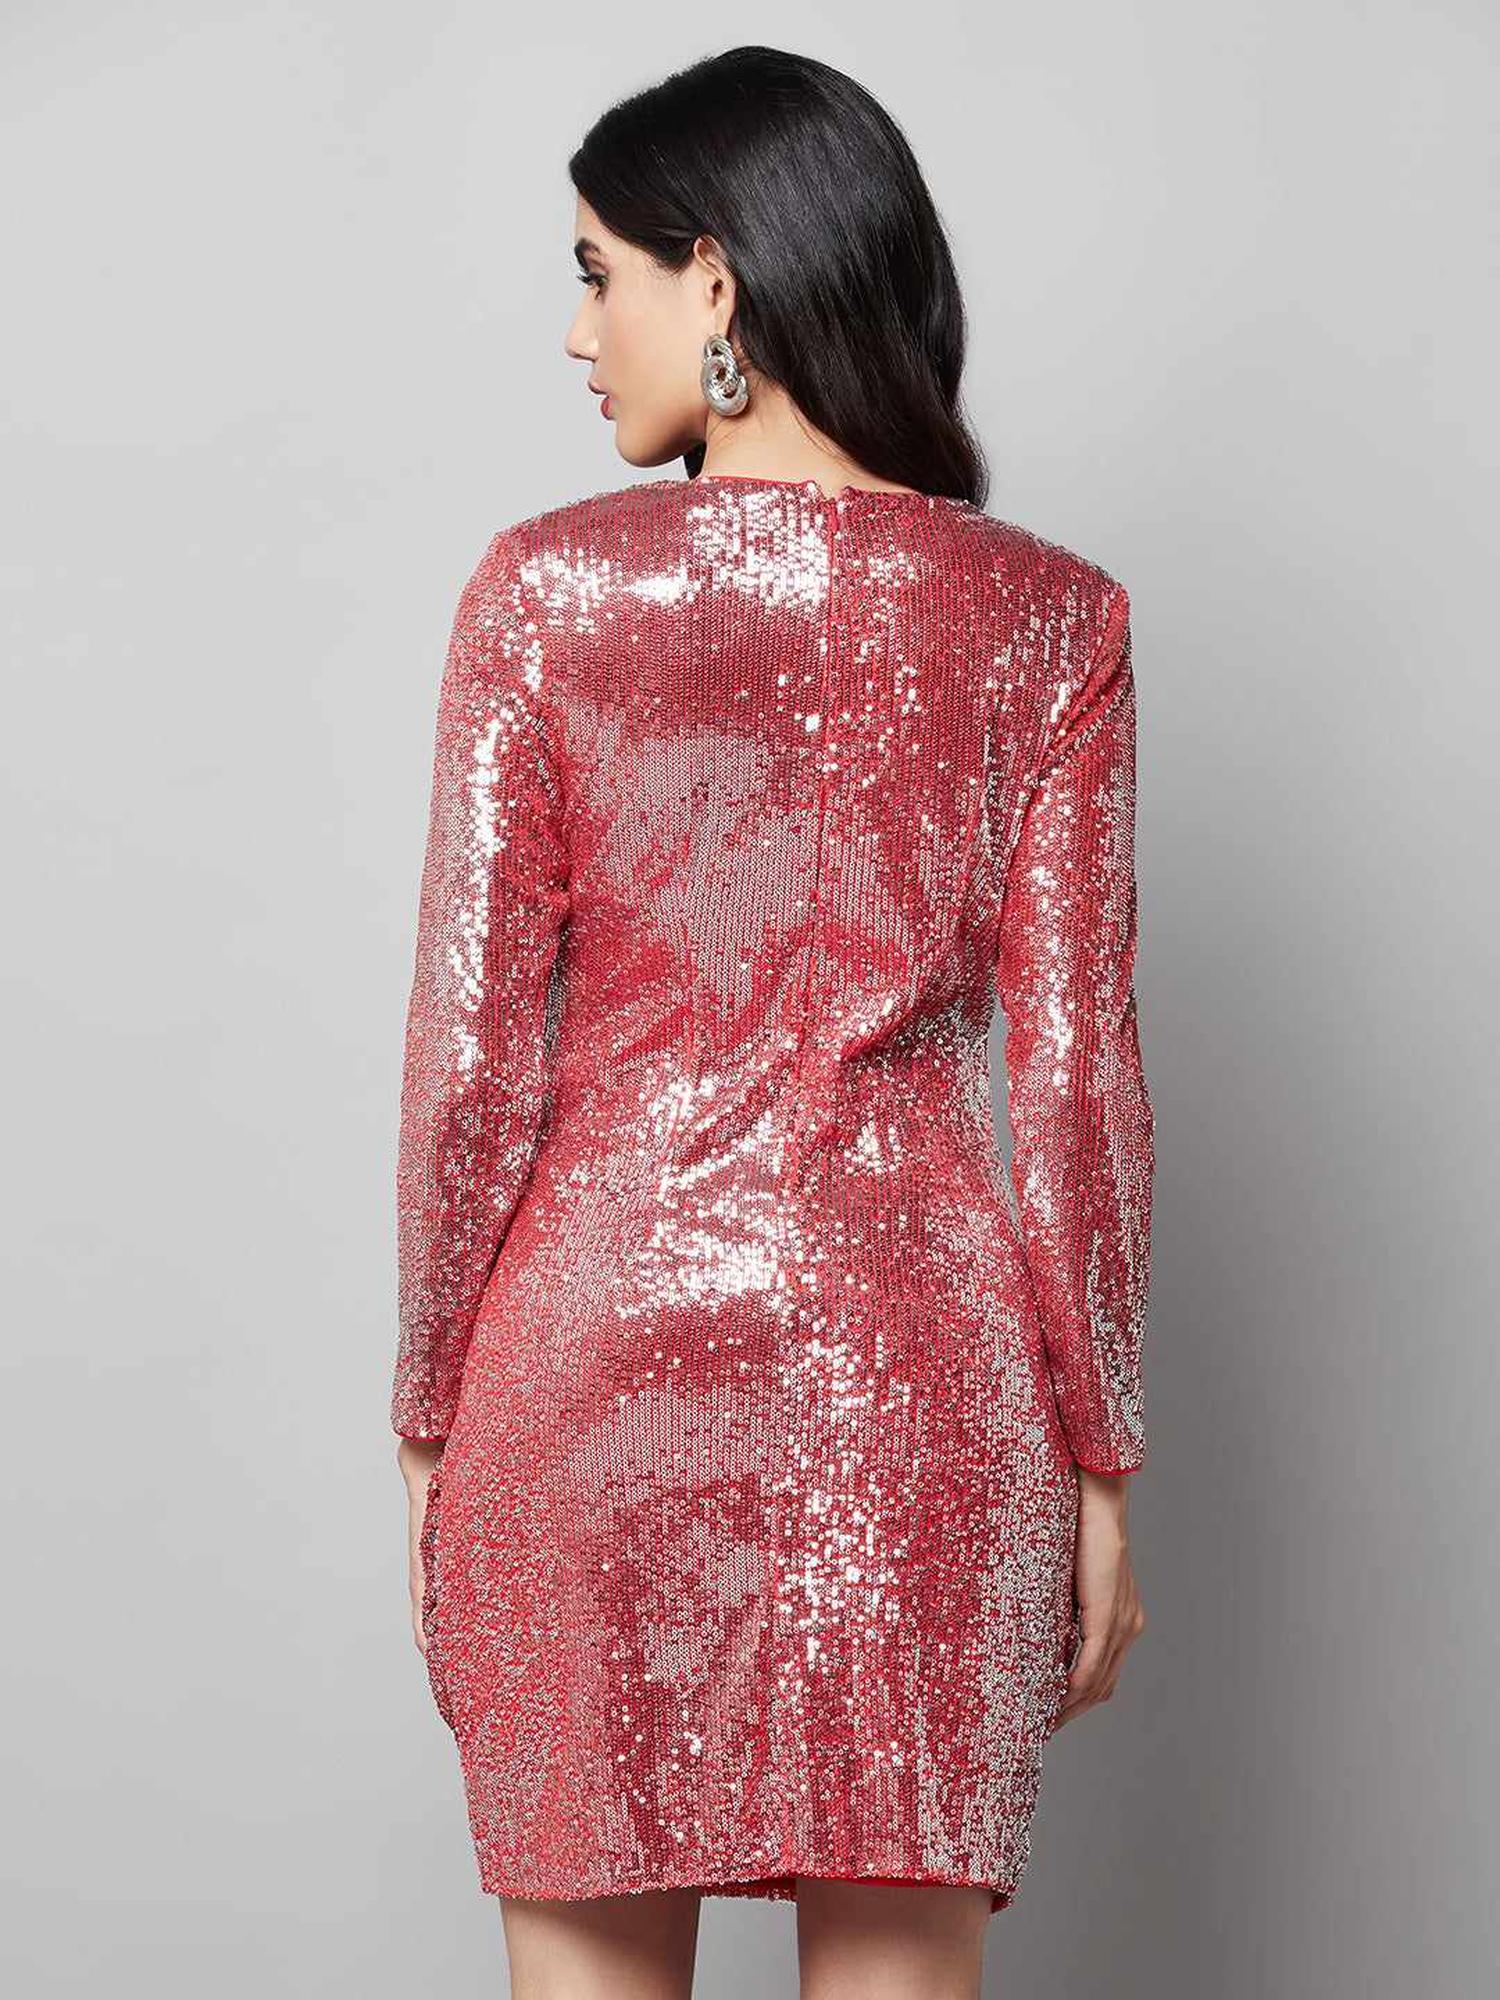 Shimmery Nights Red Party Dress